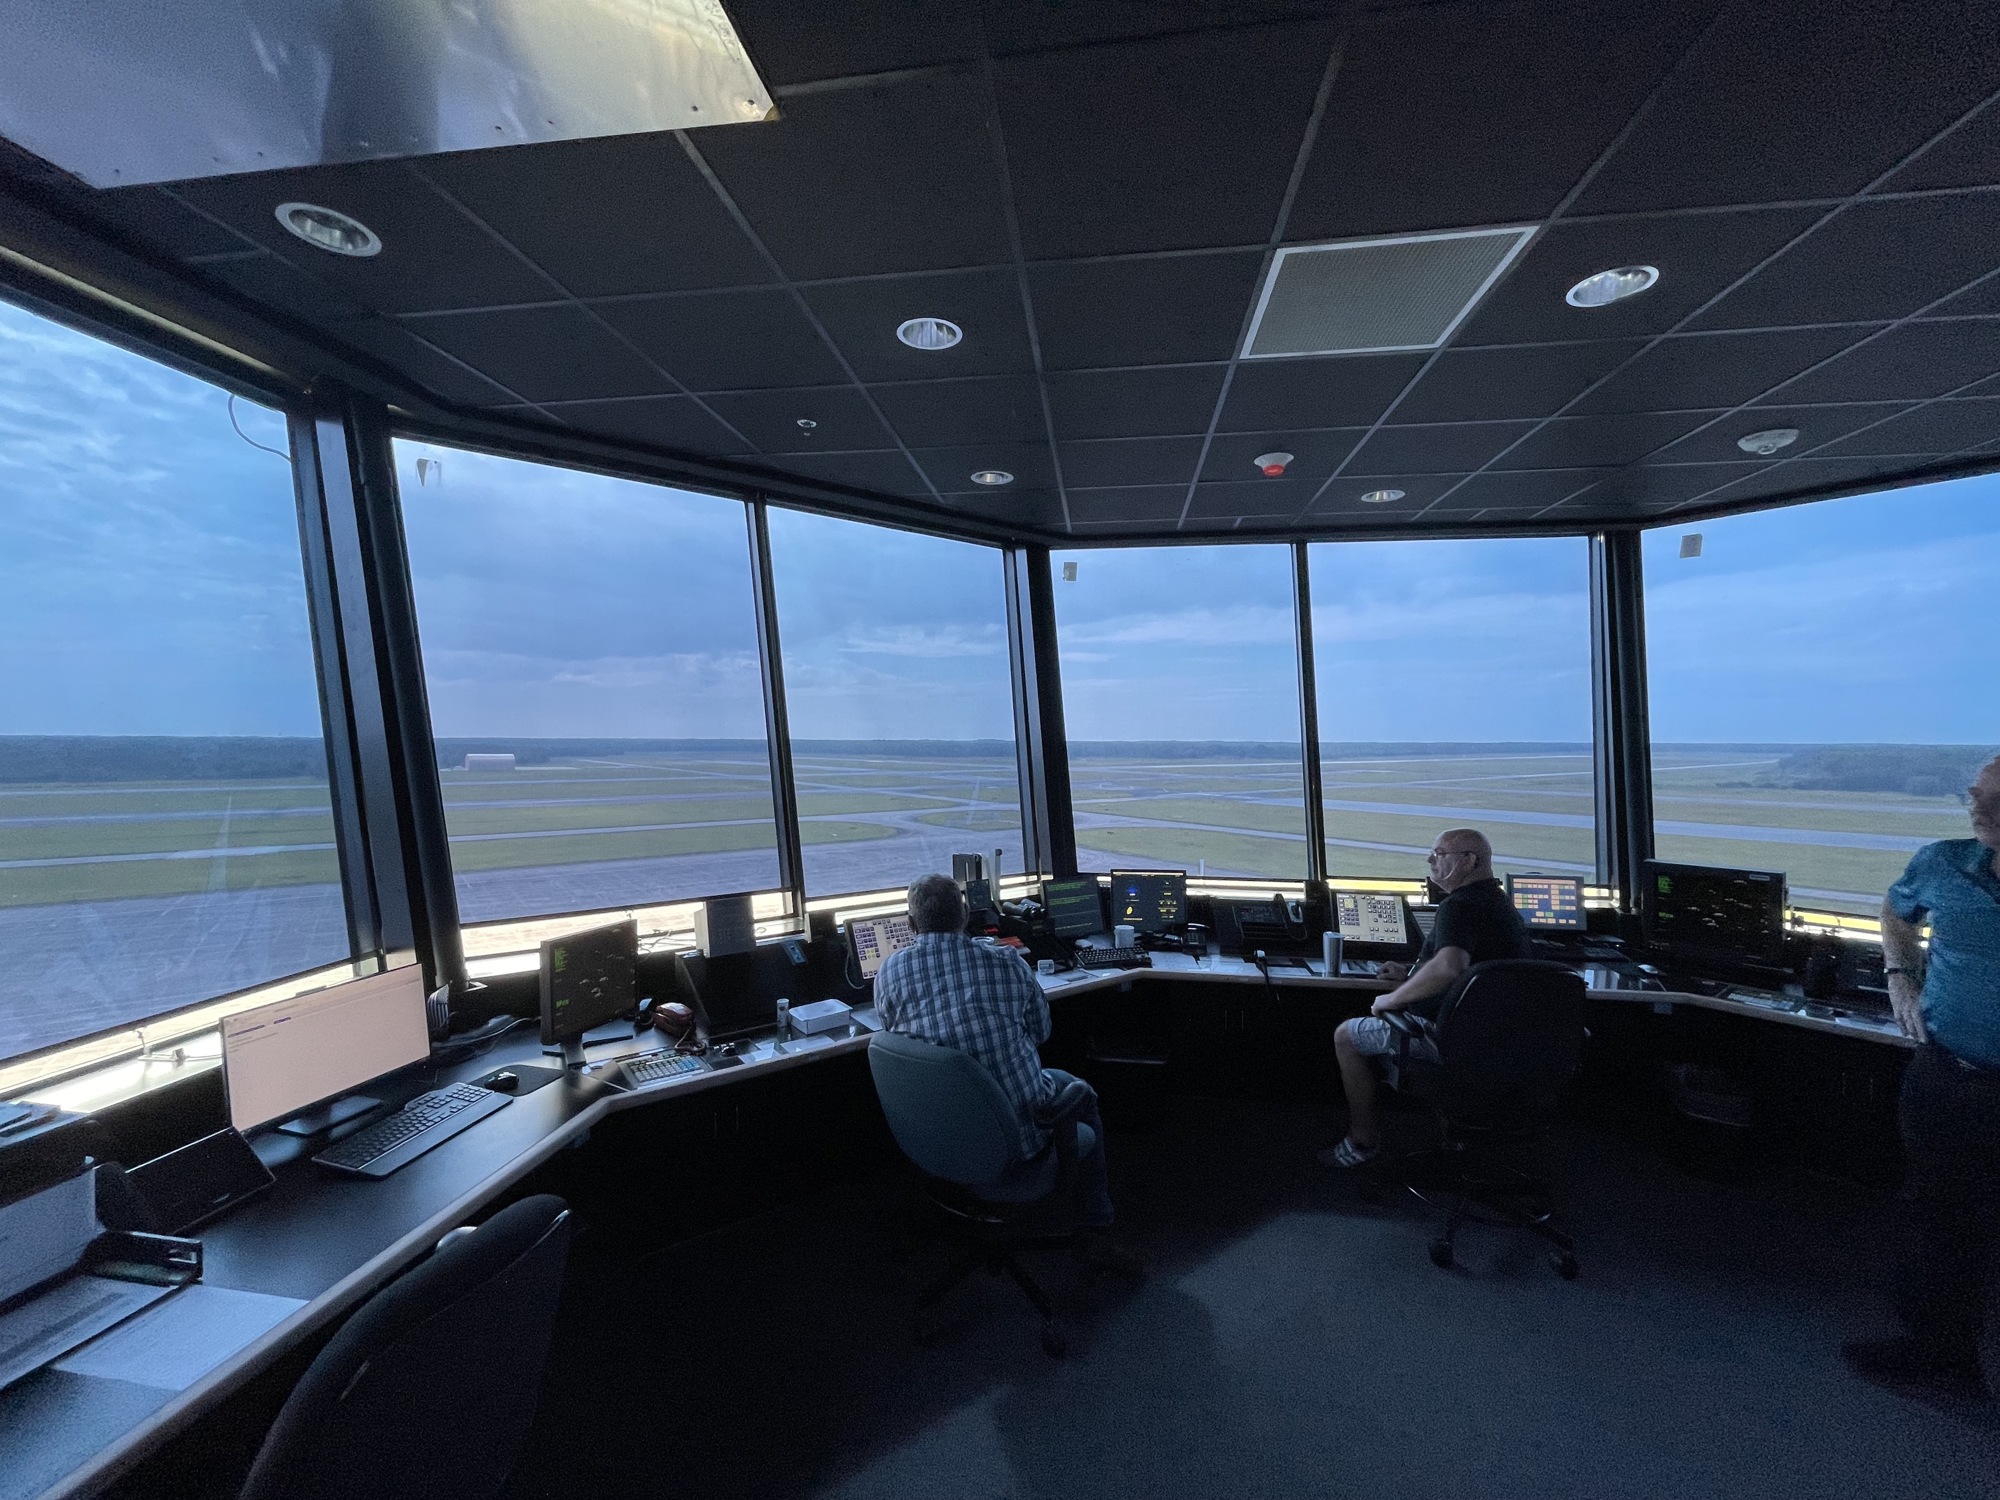 The mission control center atop the Cecil Spaceport tower.